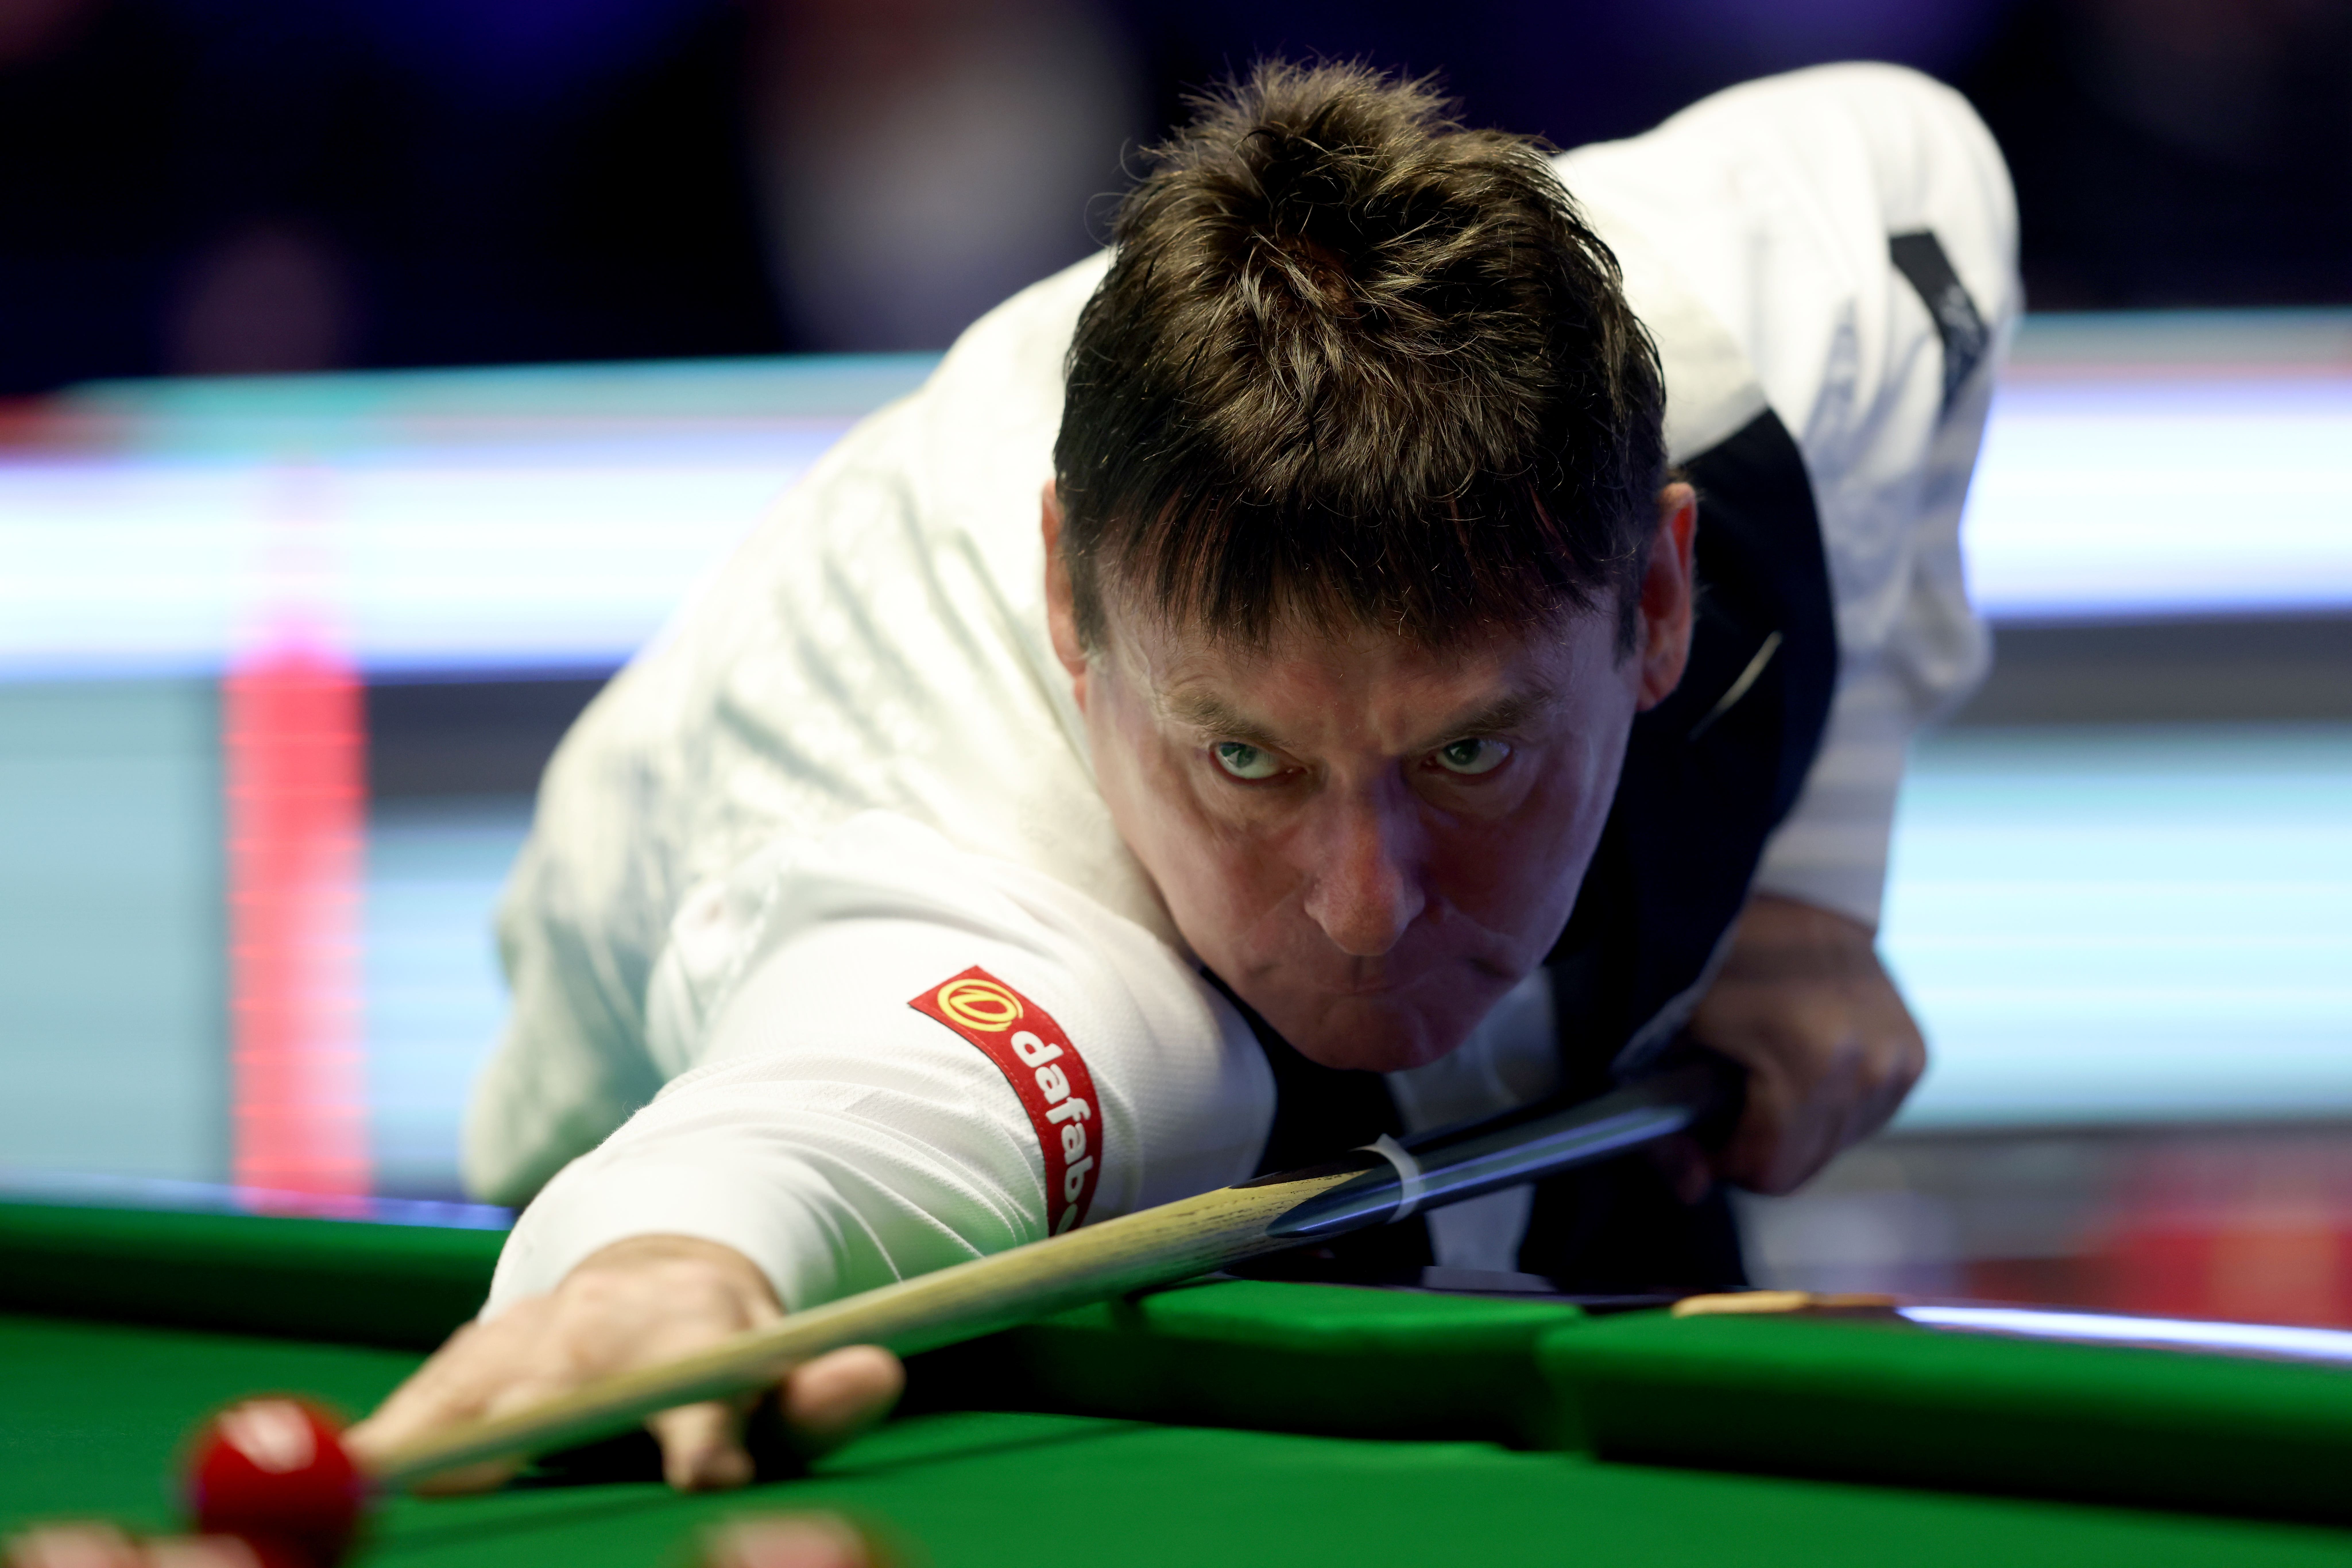 Snooker legend Jimmy White shows his class to reach last 16 of German Masters The Independent